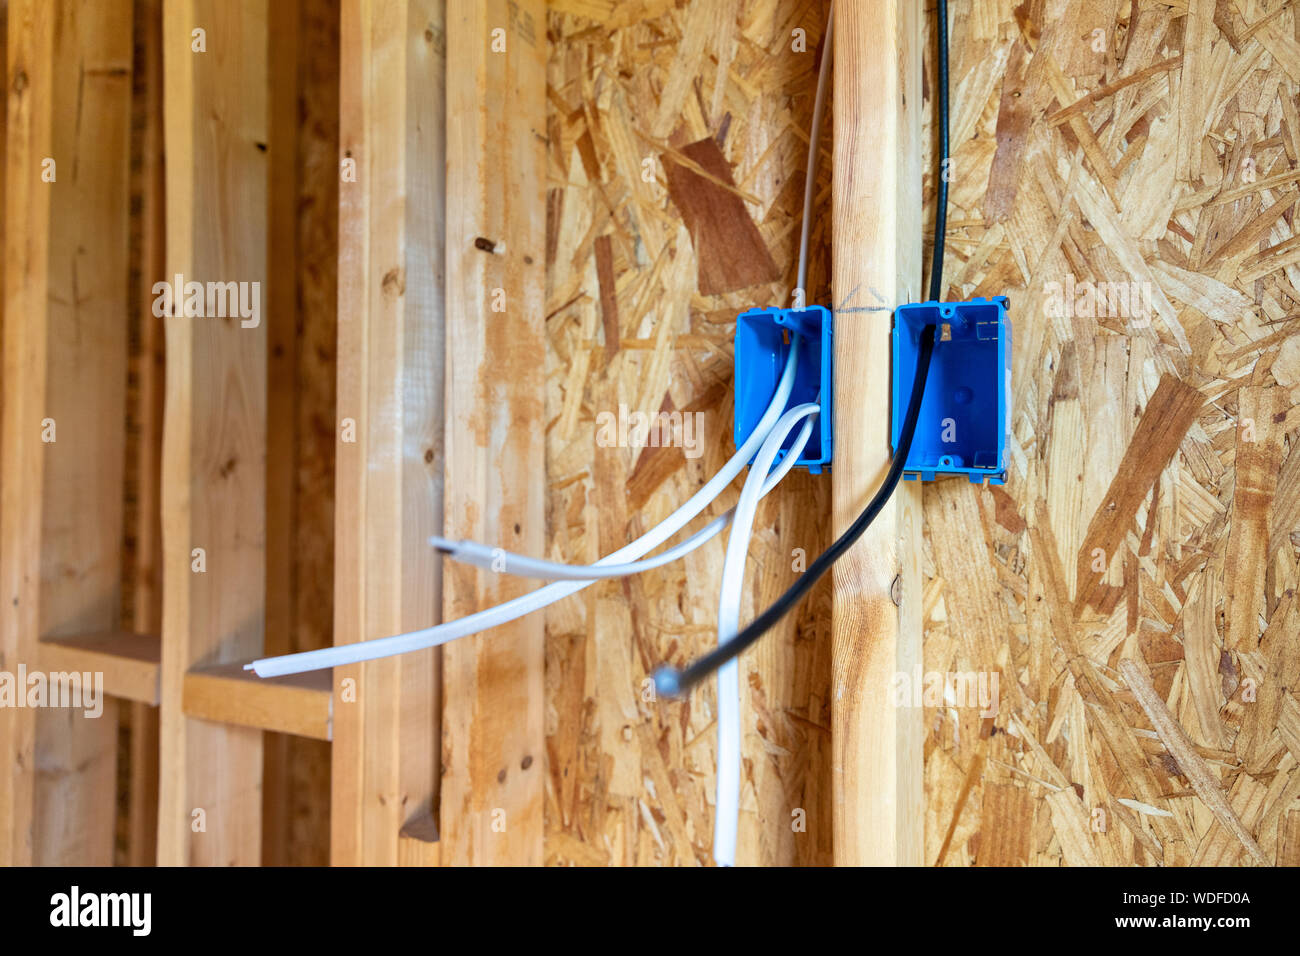 Electrical wiring and CATV cable in walls of new home construction Stock Photo